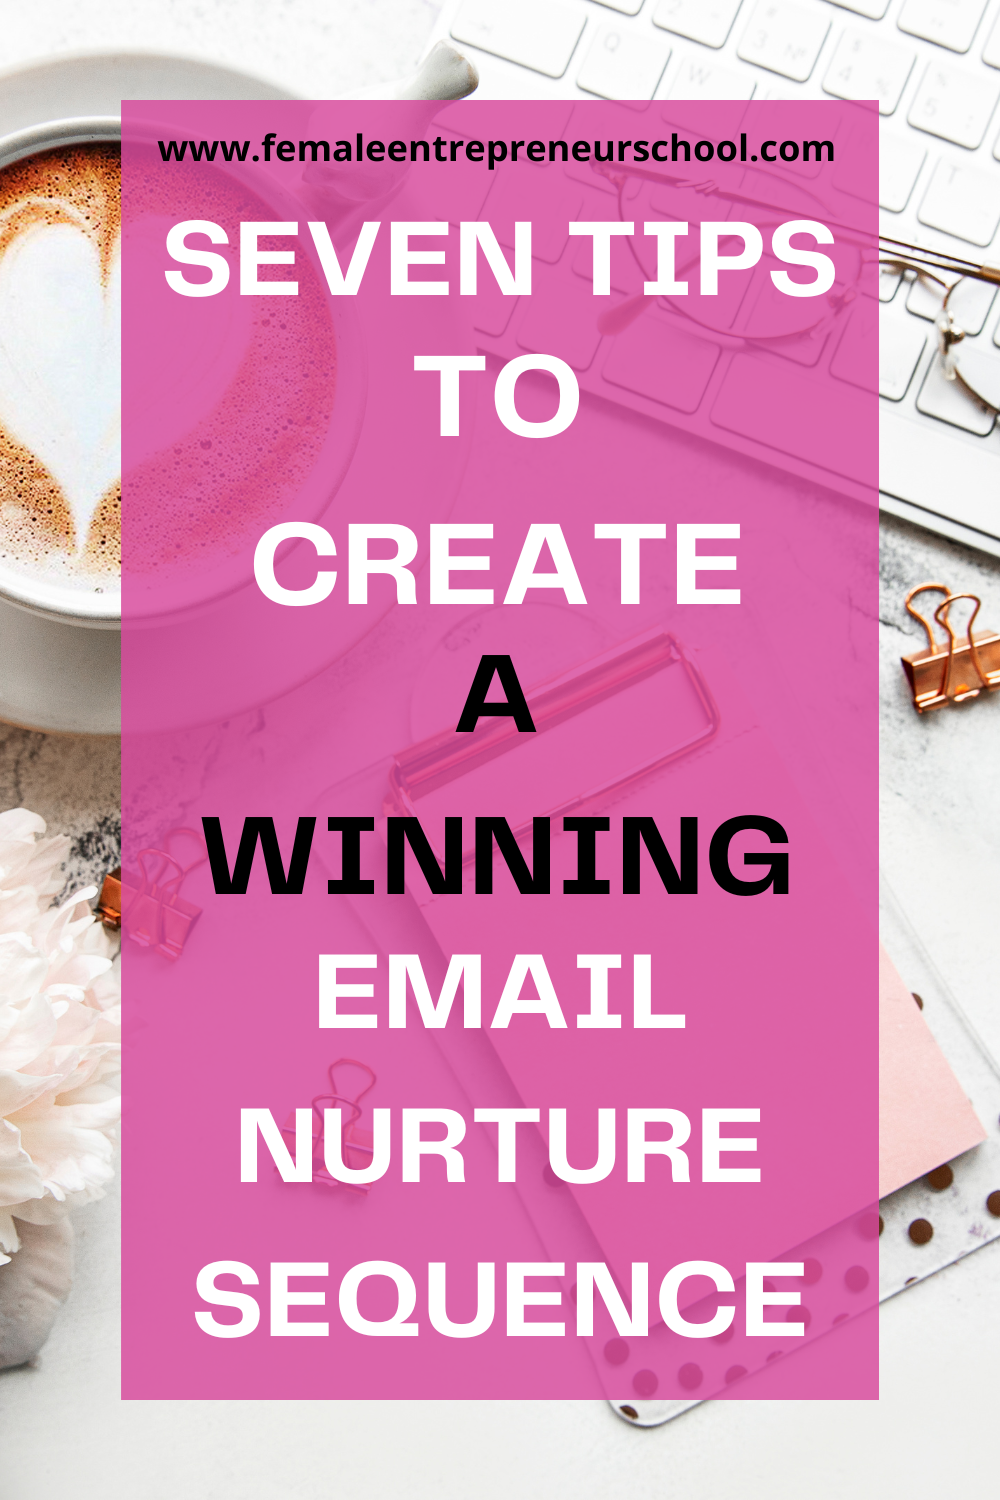 Seven Tips To Create A Winning Email Nurture Sequence